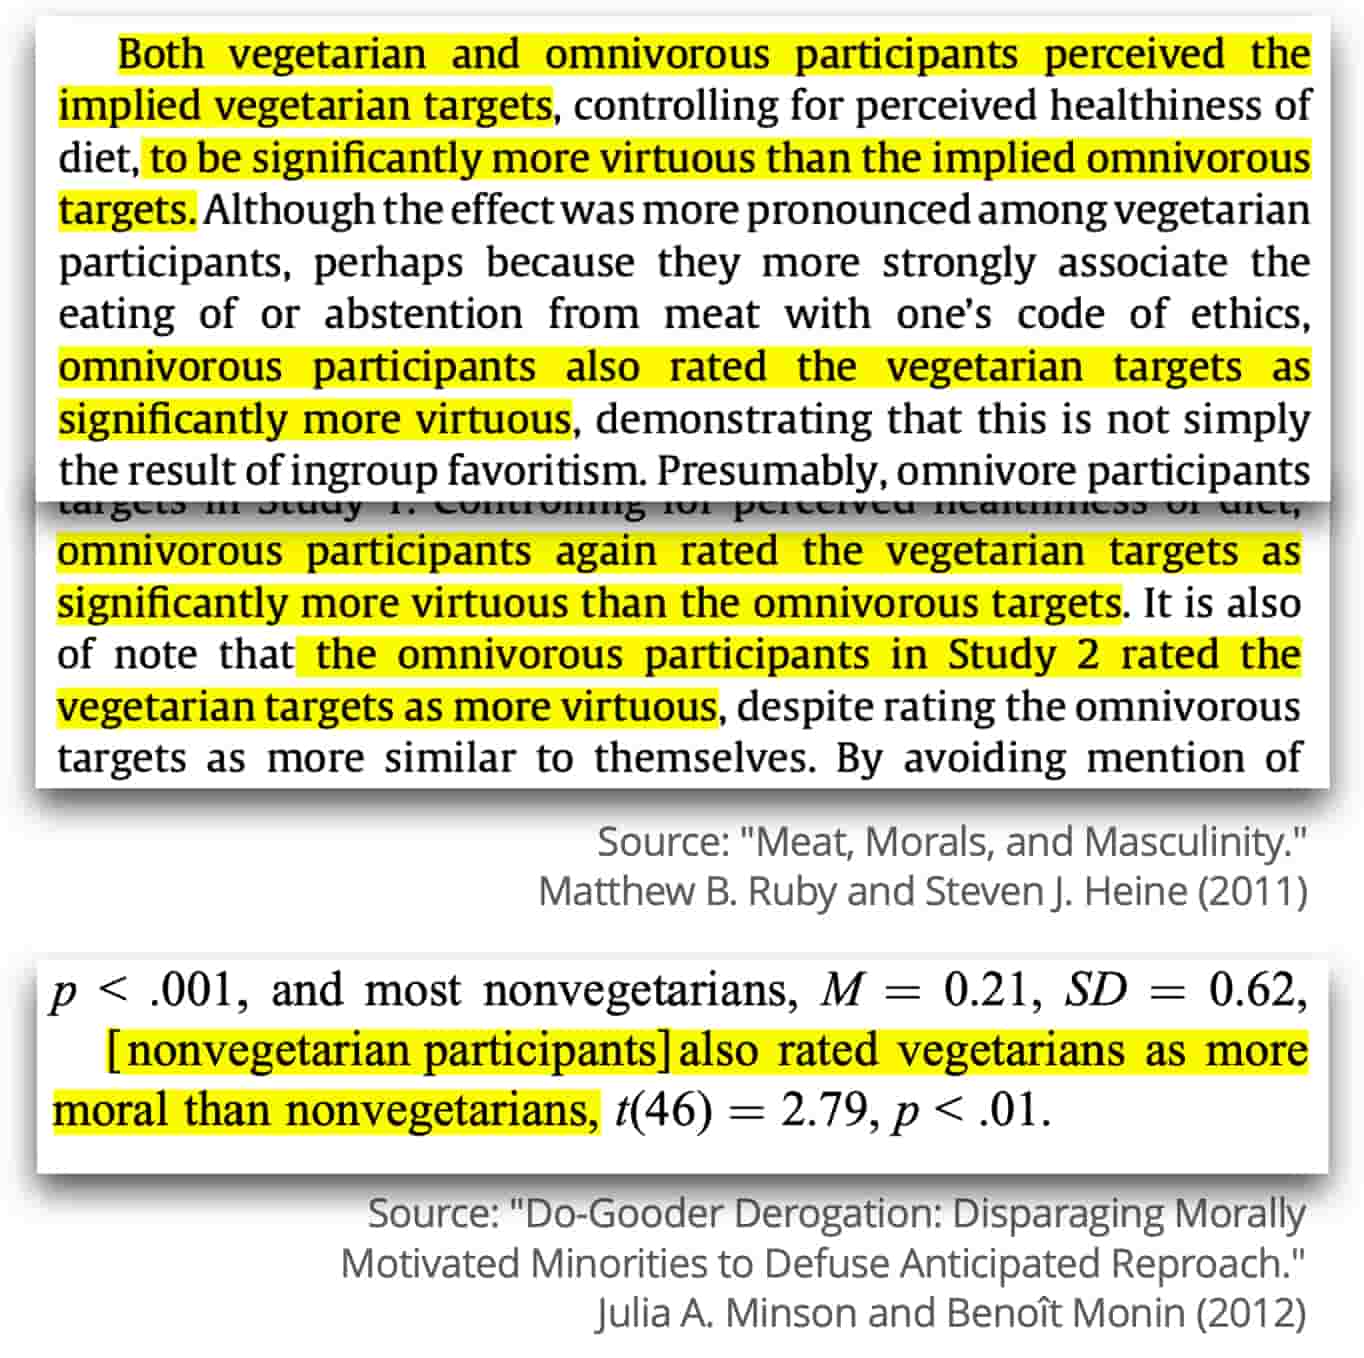 Excerpts from studies on anti-vegetarian bias stating that non-vegetarian/omnivorous participants rated vegetarians as more virtuous and more moral than non-vegetarians/omnivores.